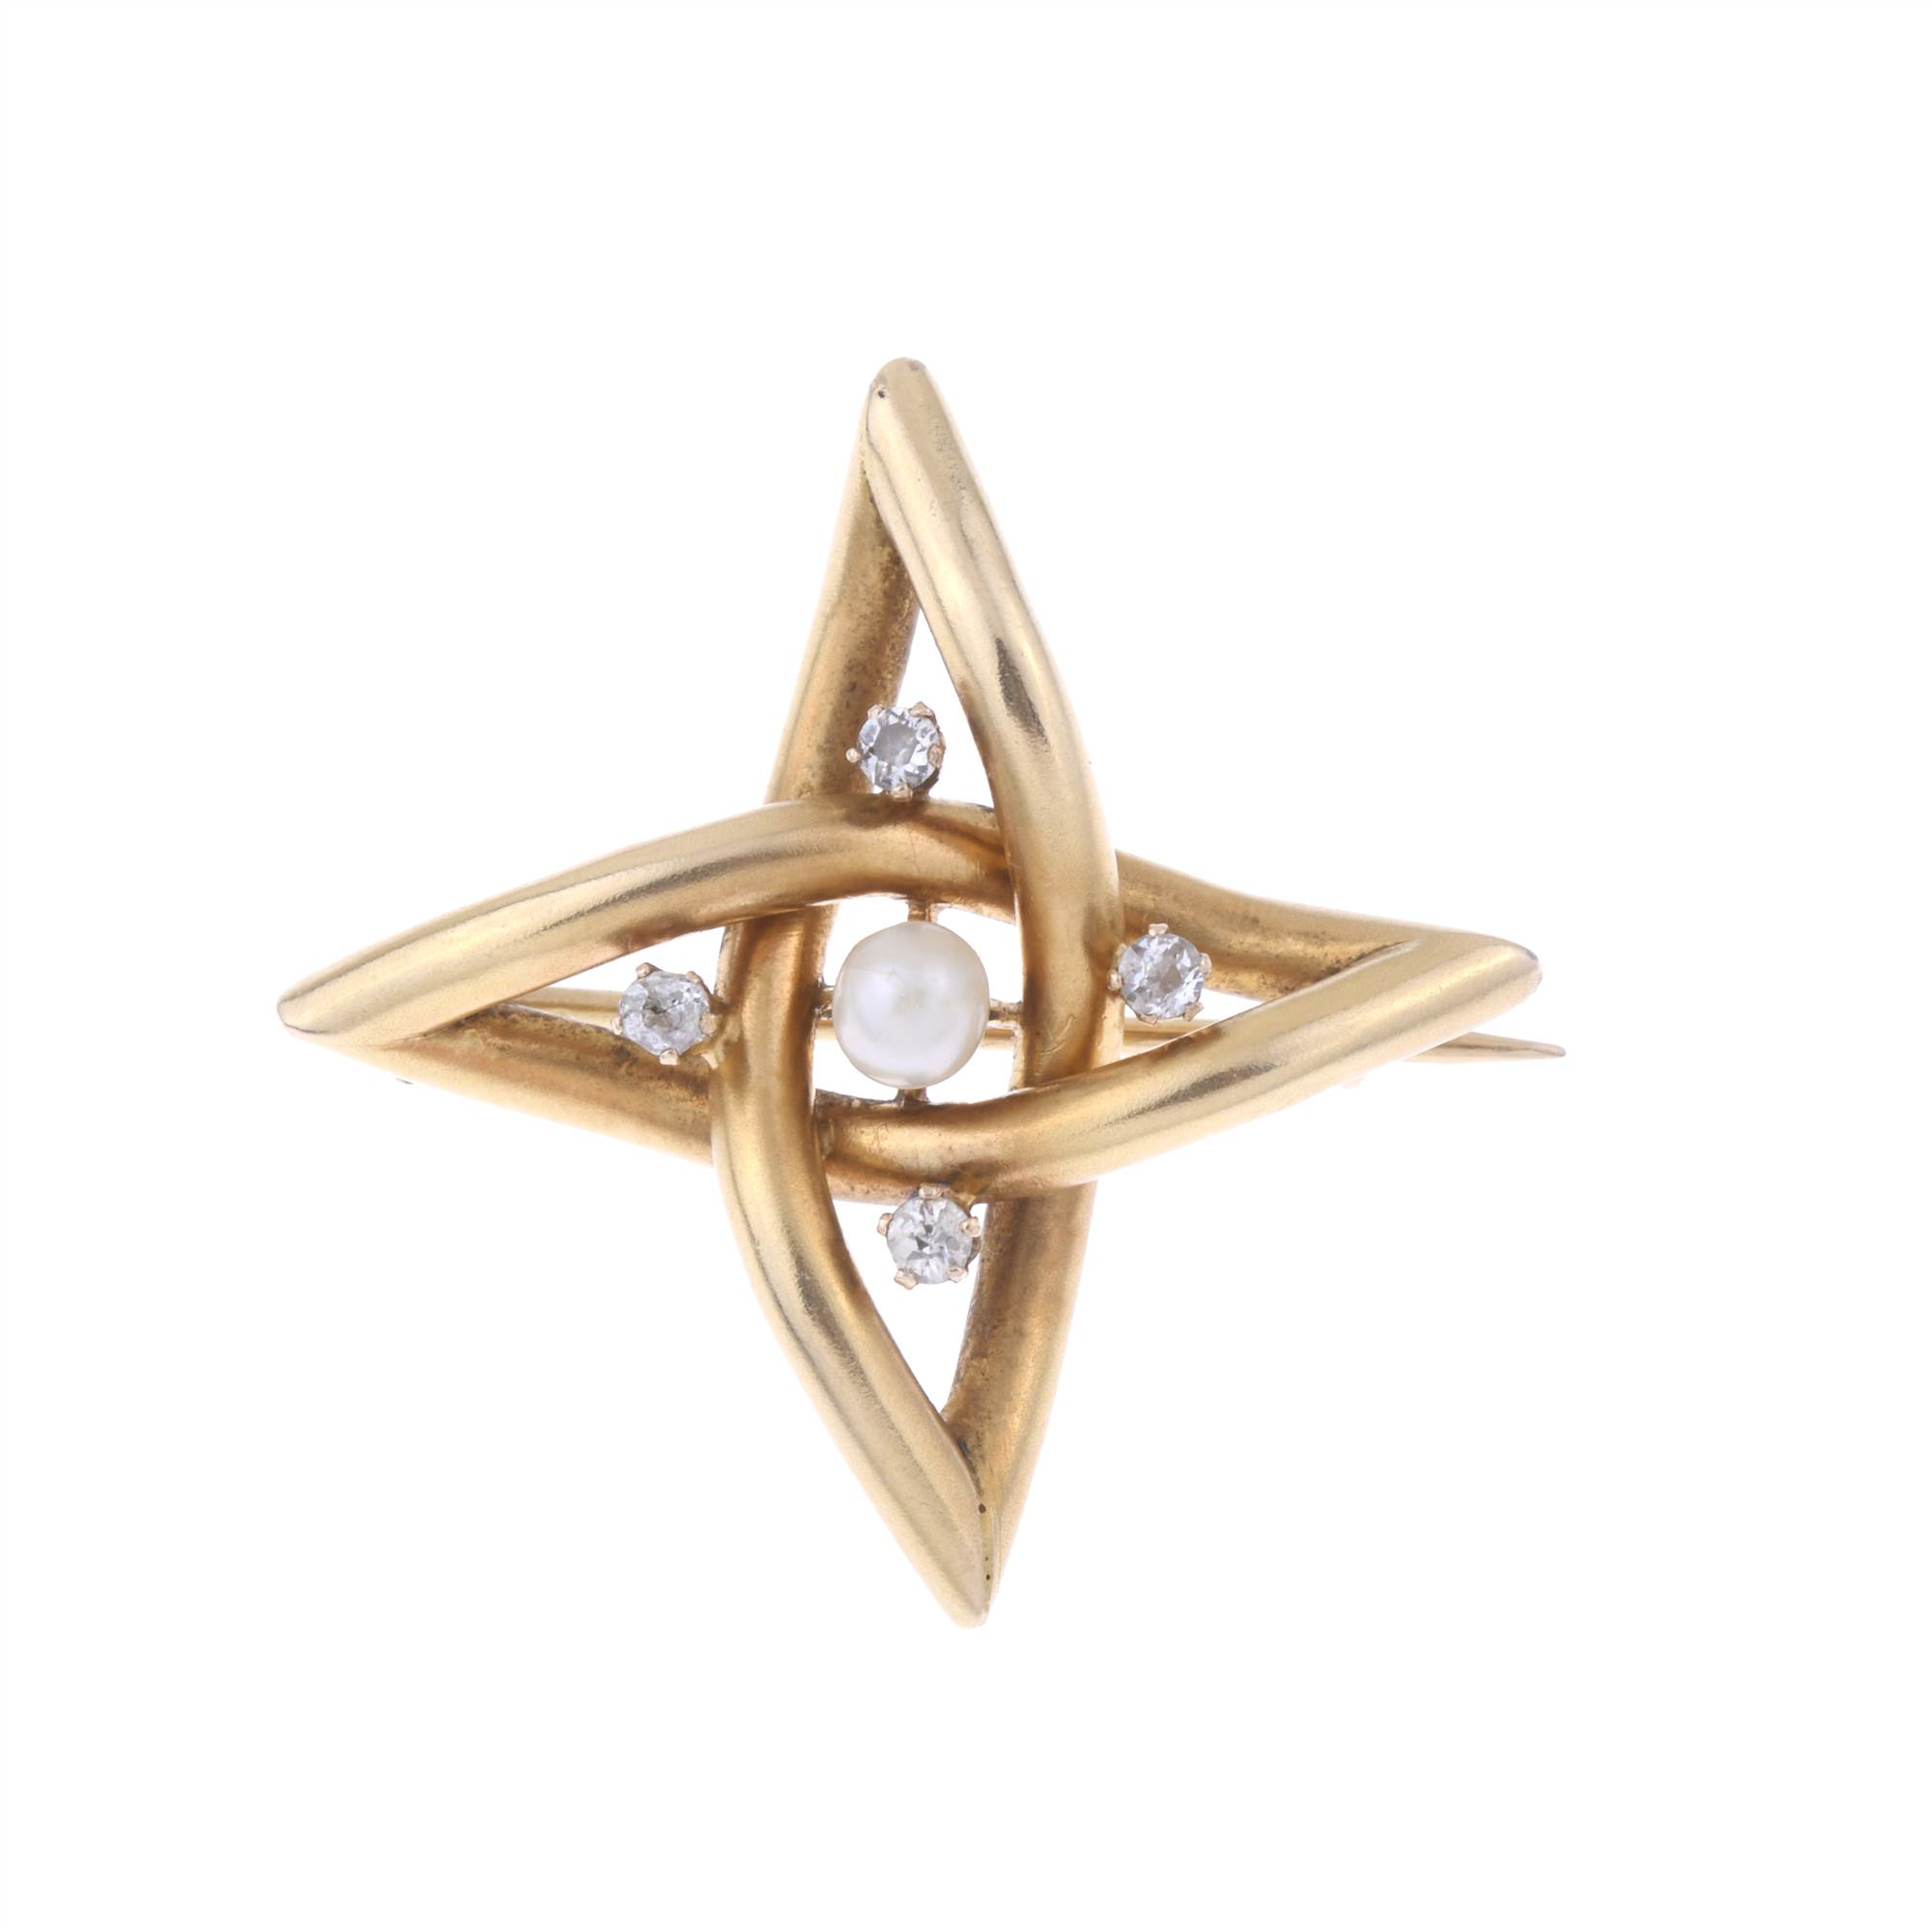 STAR-SHAPED BROOCH IN YELLOW GOLD AND DIAMONDS.